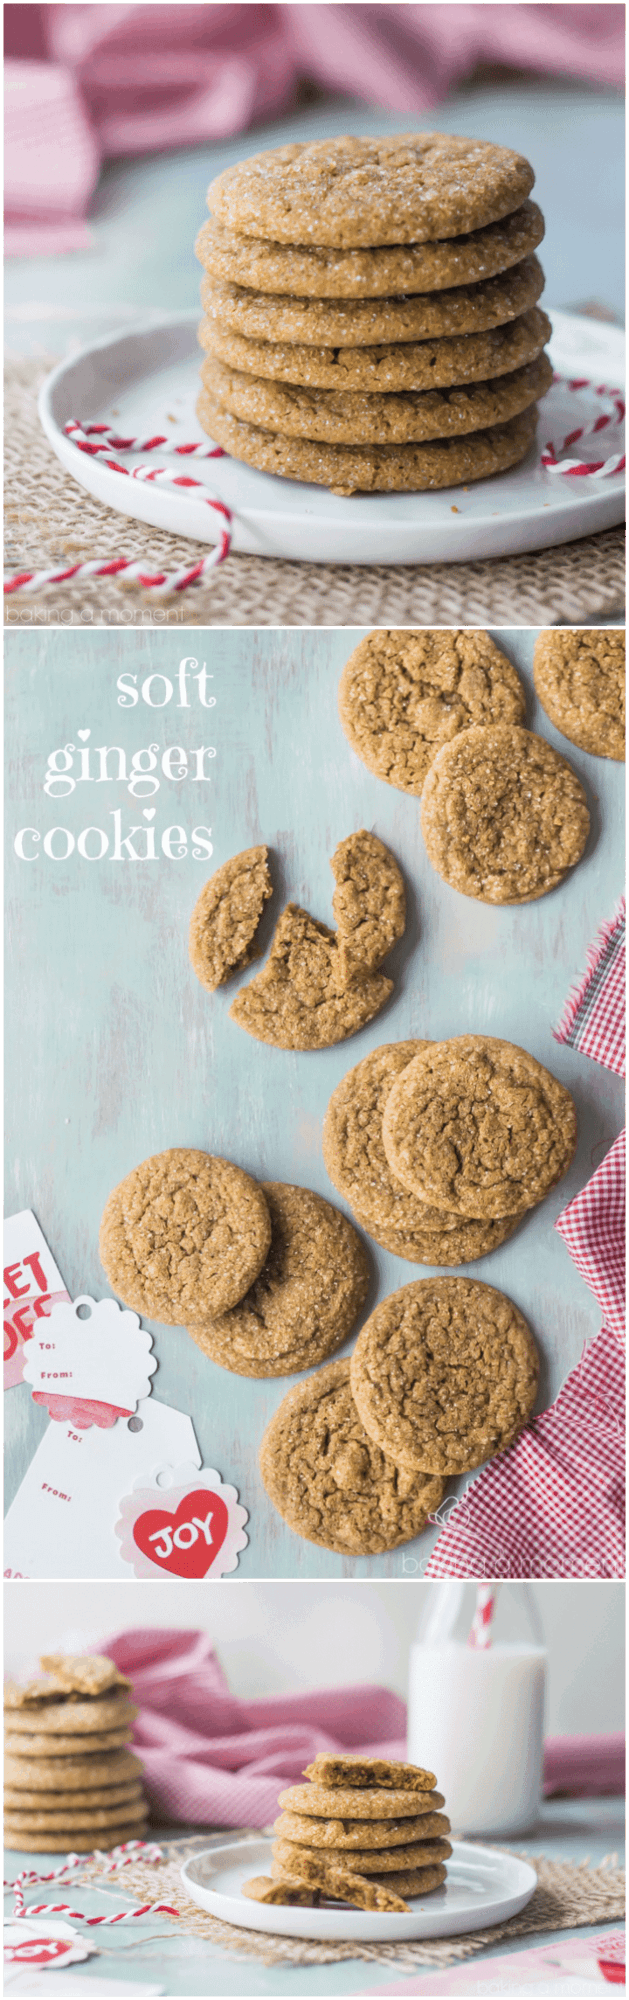 The perfect ginger cookie! These are soft and a little chewy, with a warm spiciness from the ginger and a sparkly, crunchy sugar coating. #BHGCookieExchange